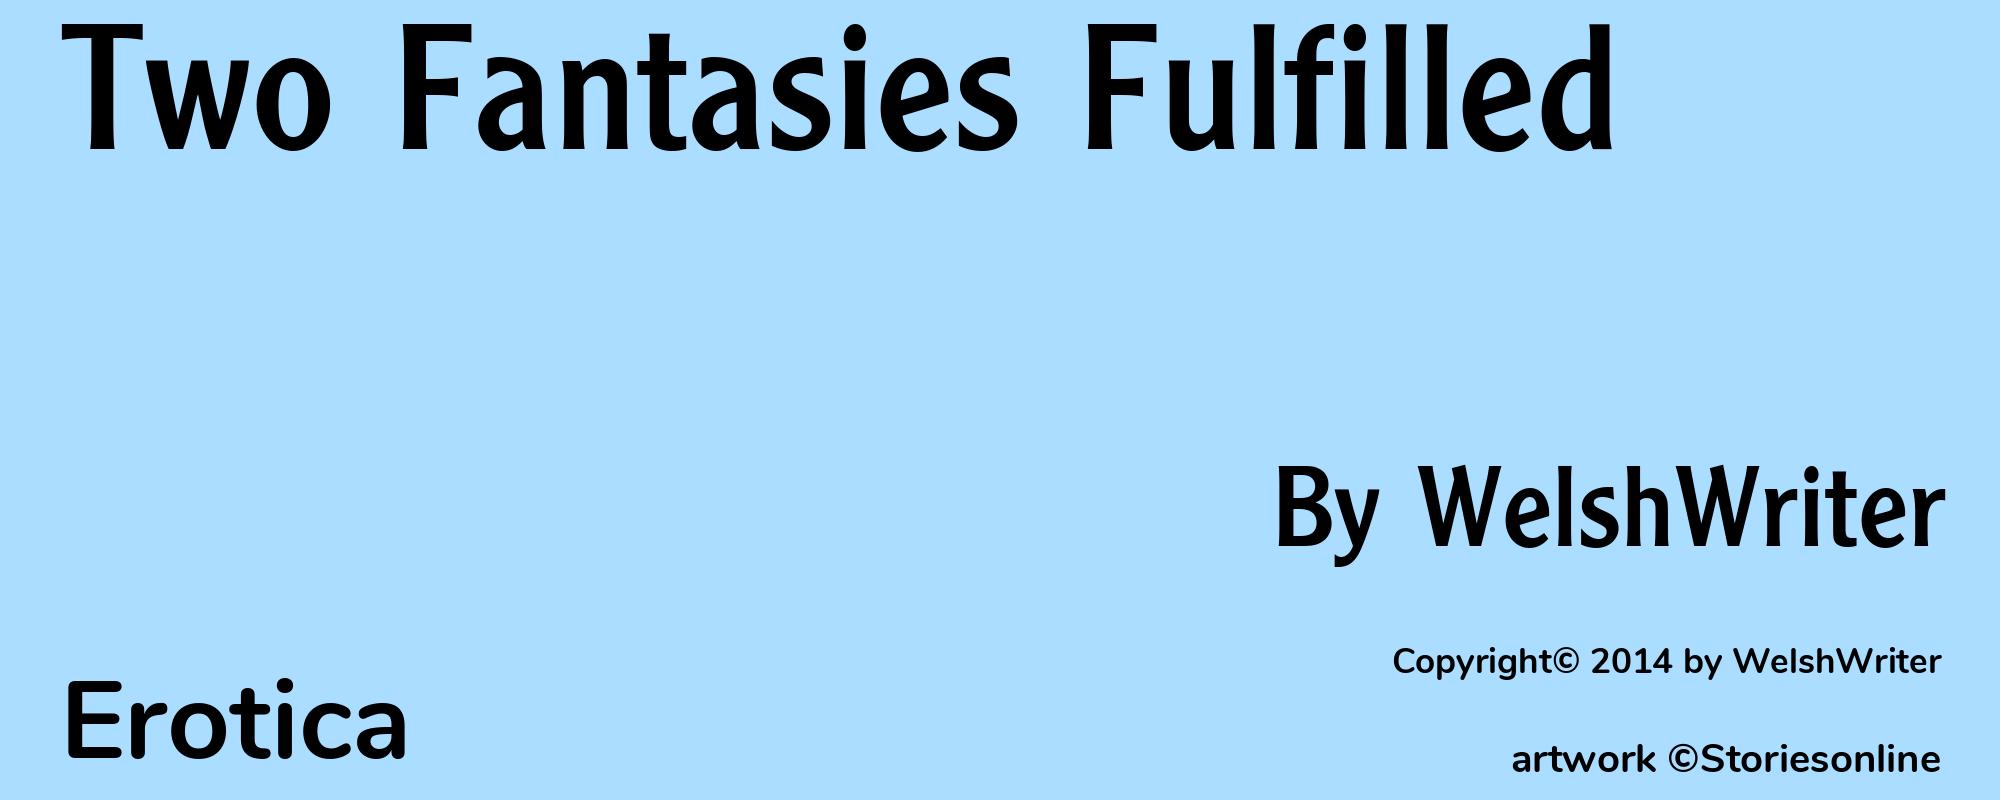 Two Fantasies Fulfilled - Cover